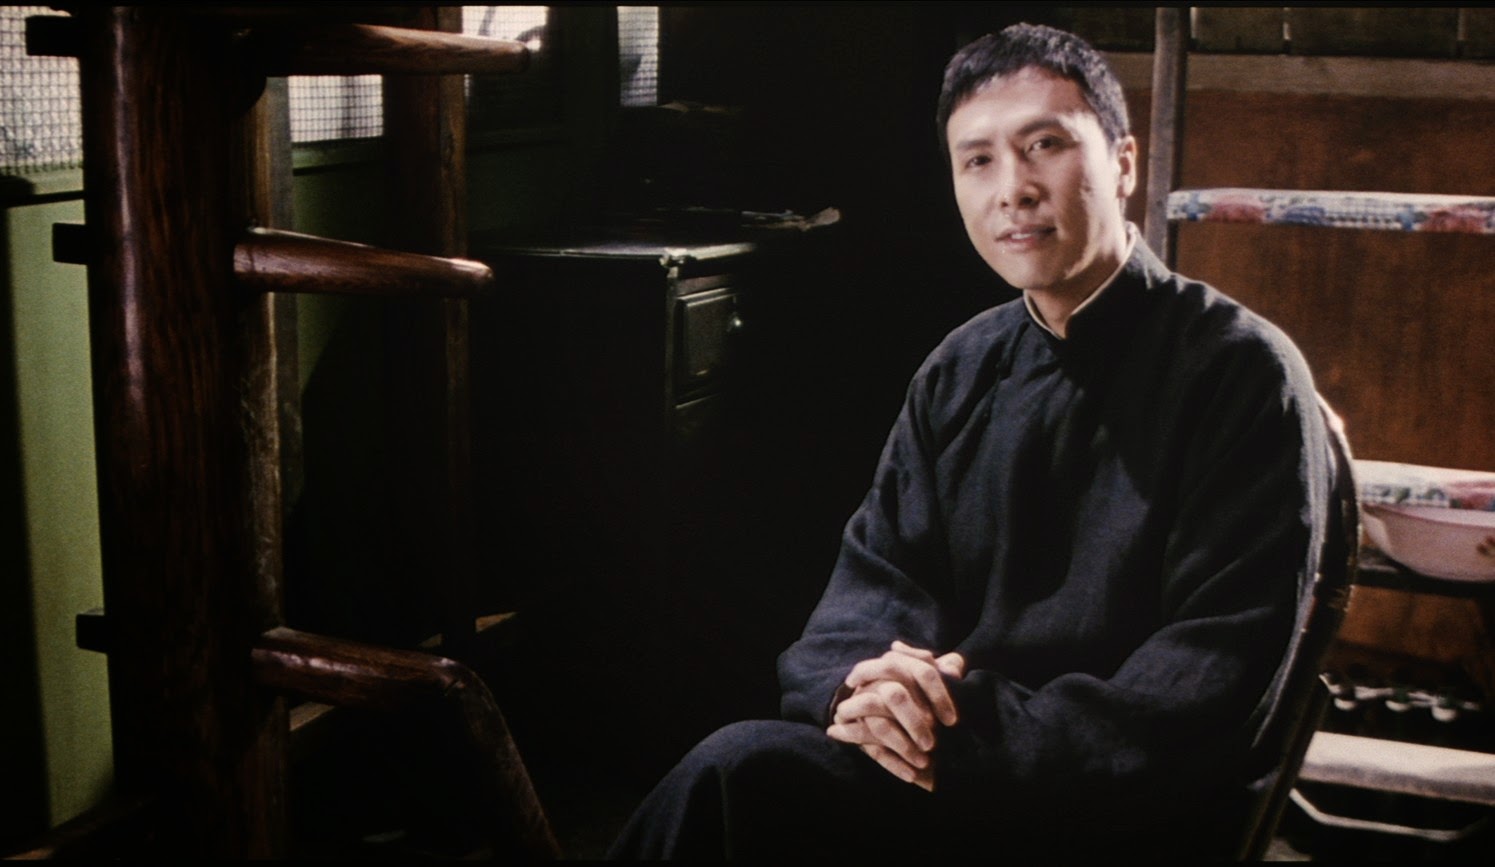 How Donnie Yen Revived Wing Chun & Ip Man's Legacy